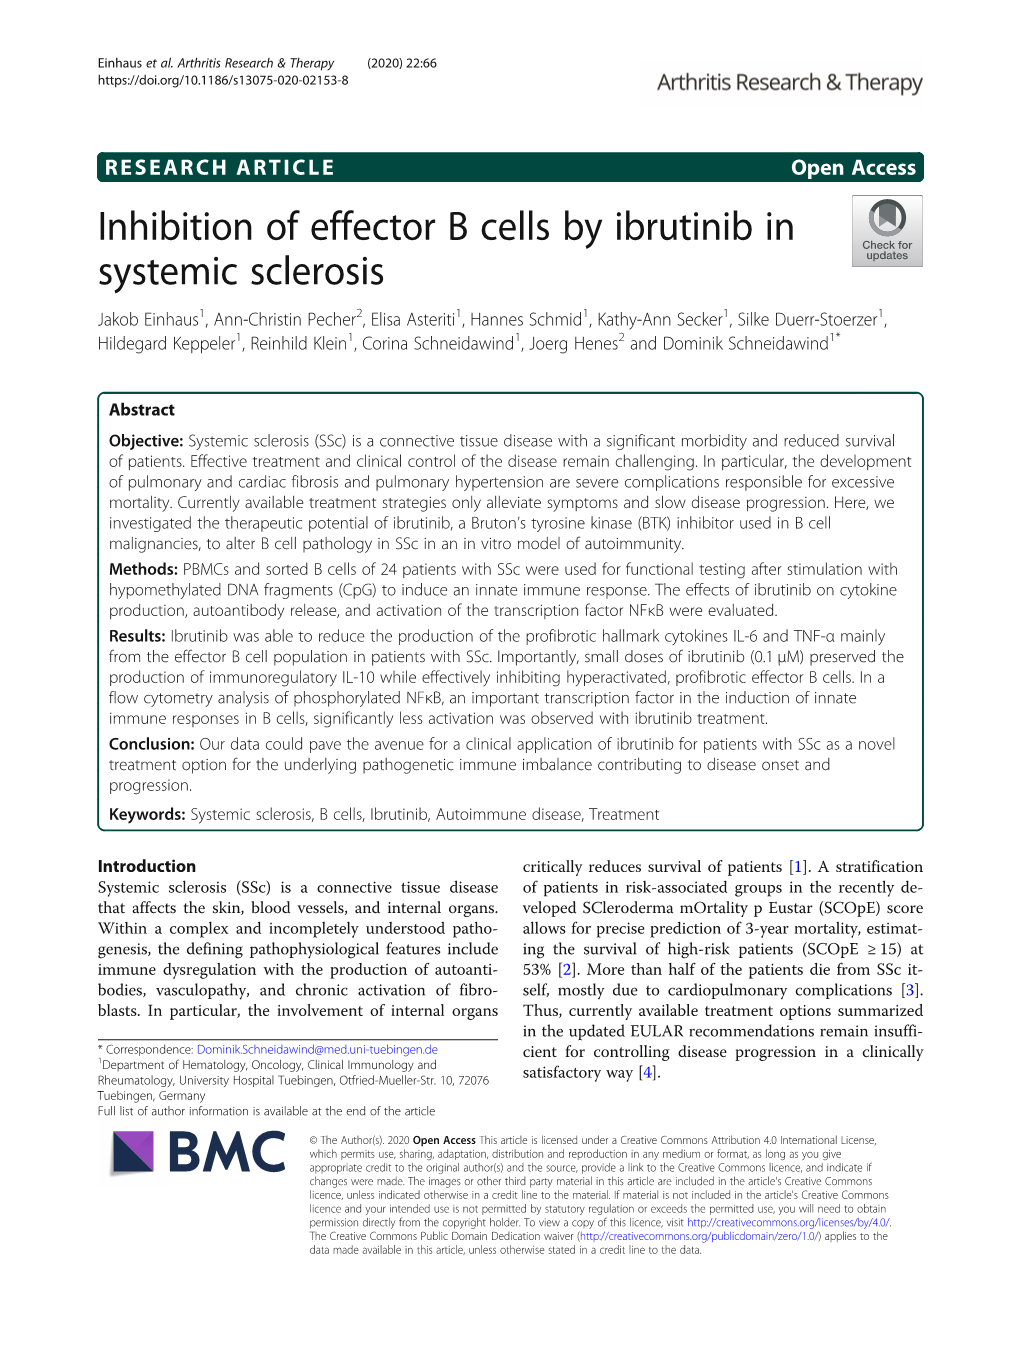 Inhibition of Effector B Cells by Ibrutinib in Systemic Sclerosis